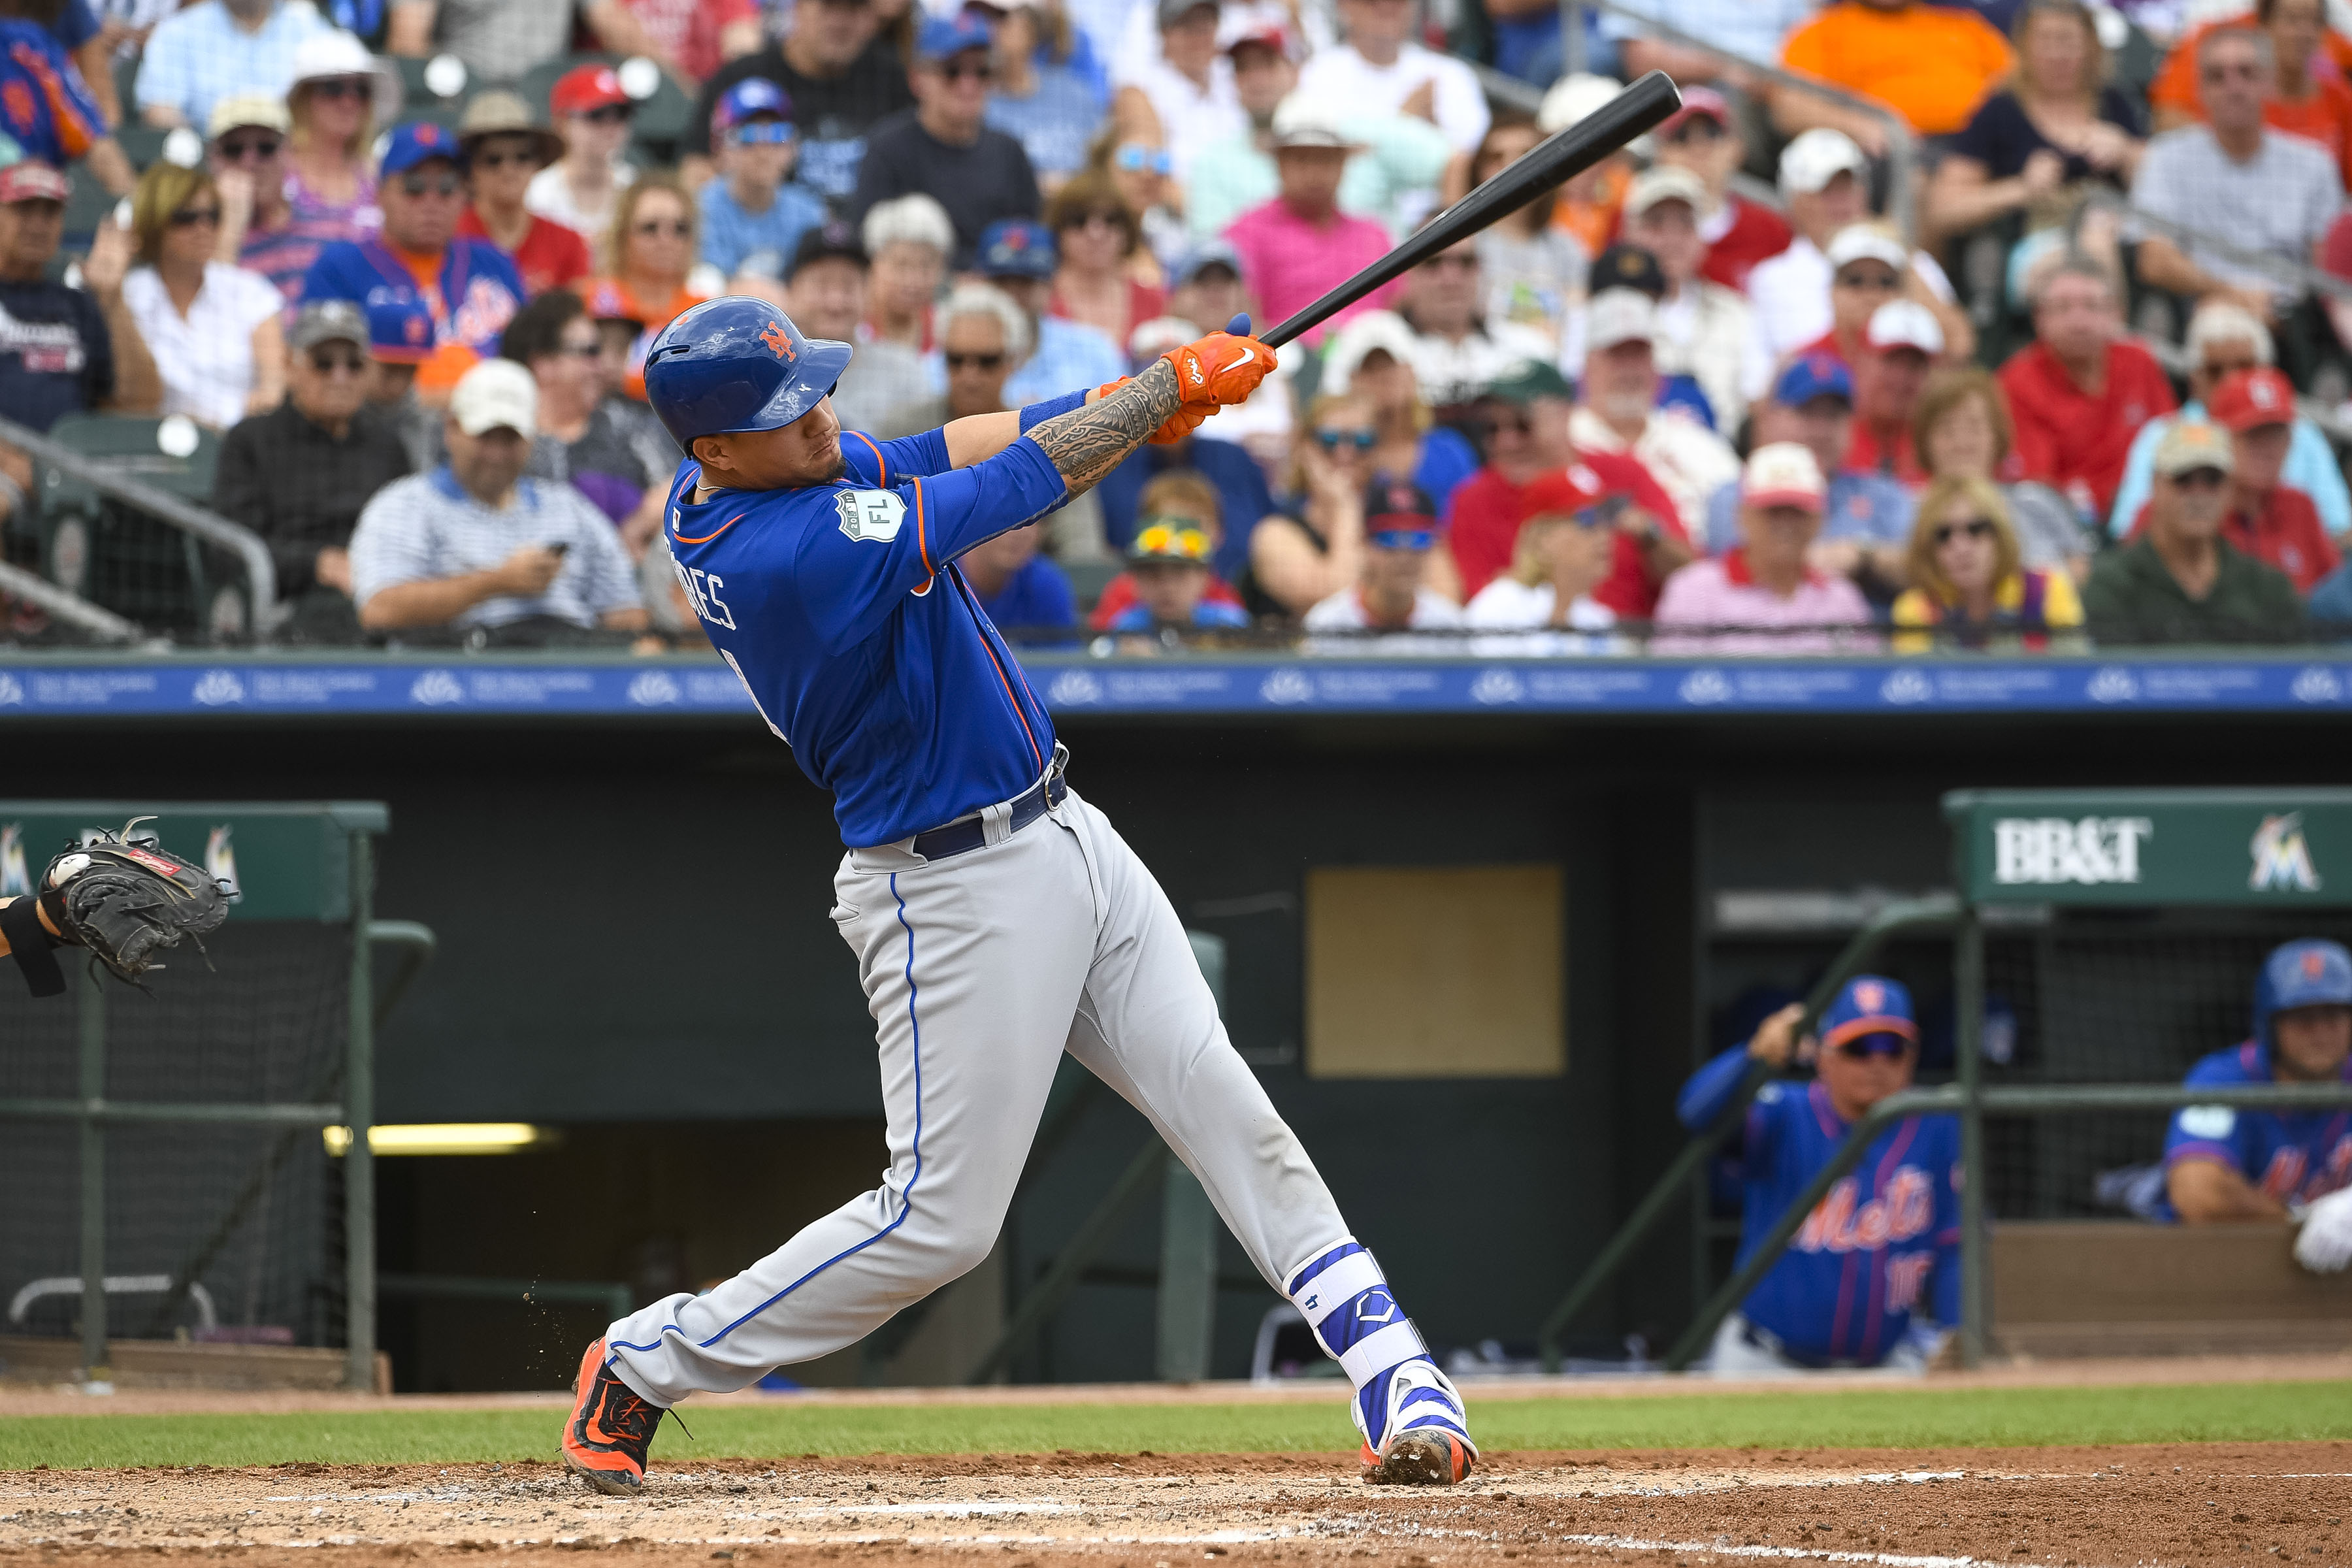 Mets manager Terry Collins takes hard line with infielder Wilmer Flores